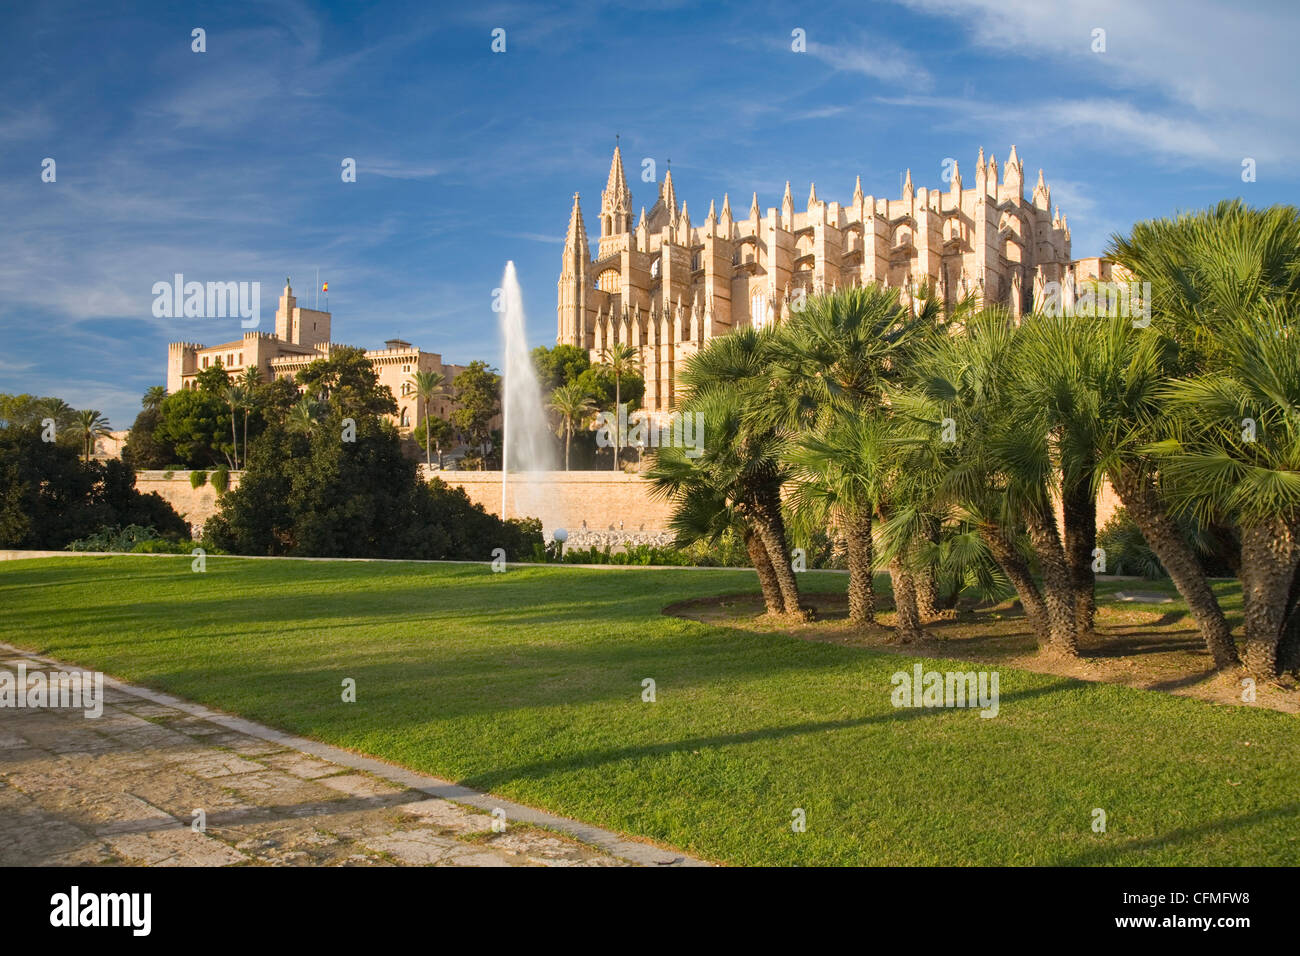 View from Parc de la Mar to the Almudaina Palace and cathedral, Palma de Mallorca, Mallorca, Balearic Islands, Spain, Europe Stock Photo